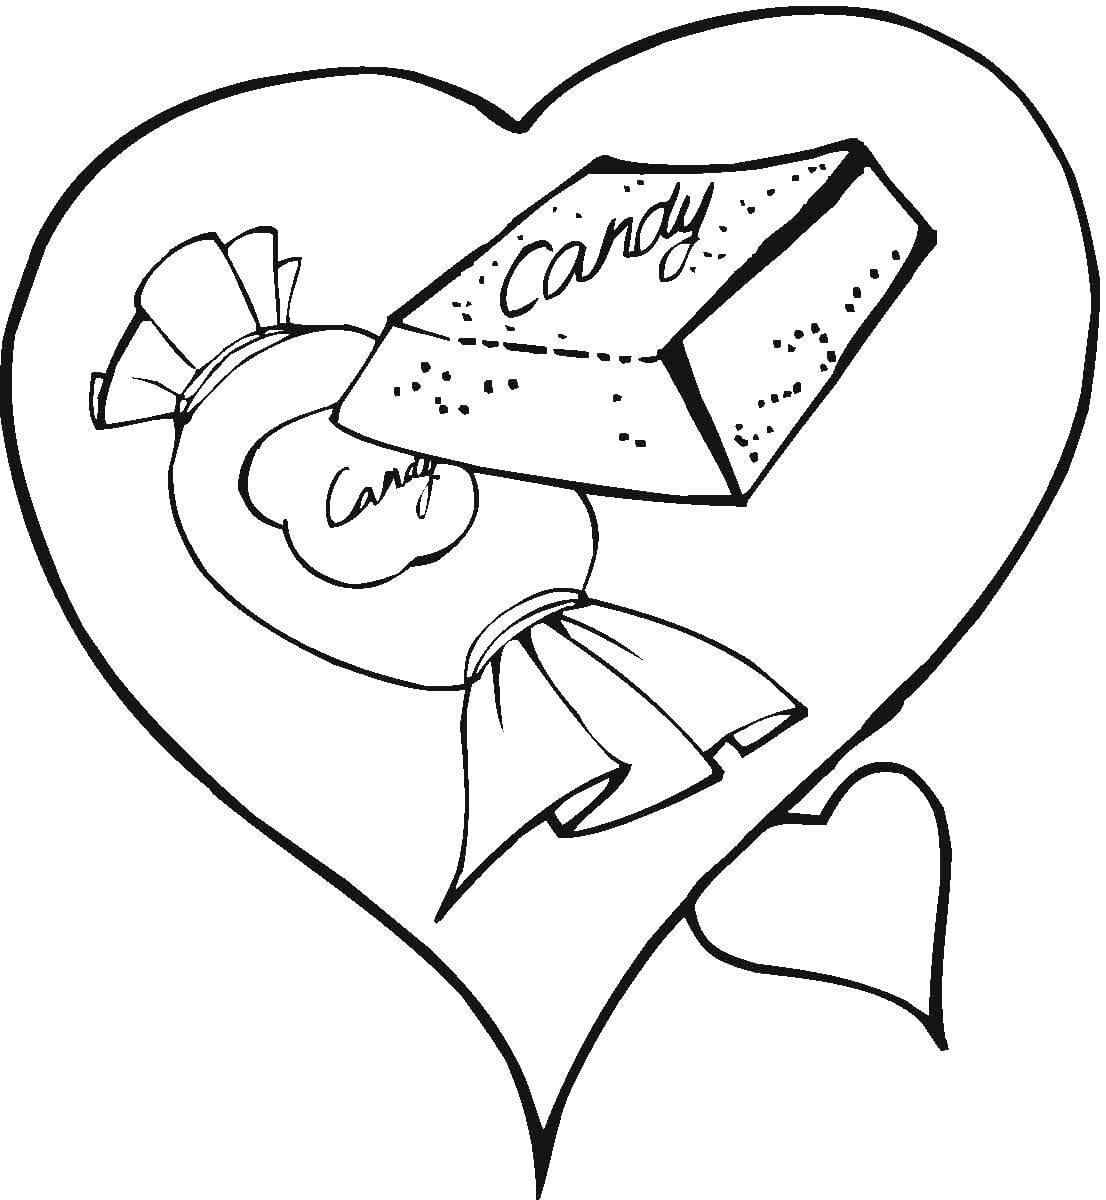 Coloring Candy heart. Category candy. Tags:  Candy, sweets.